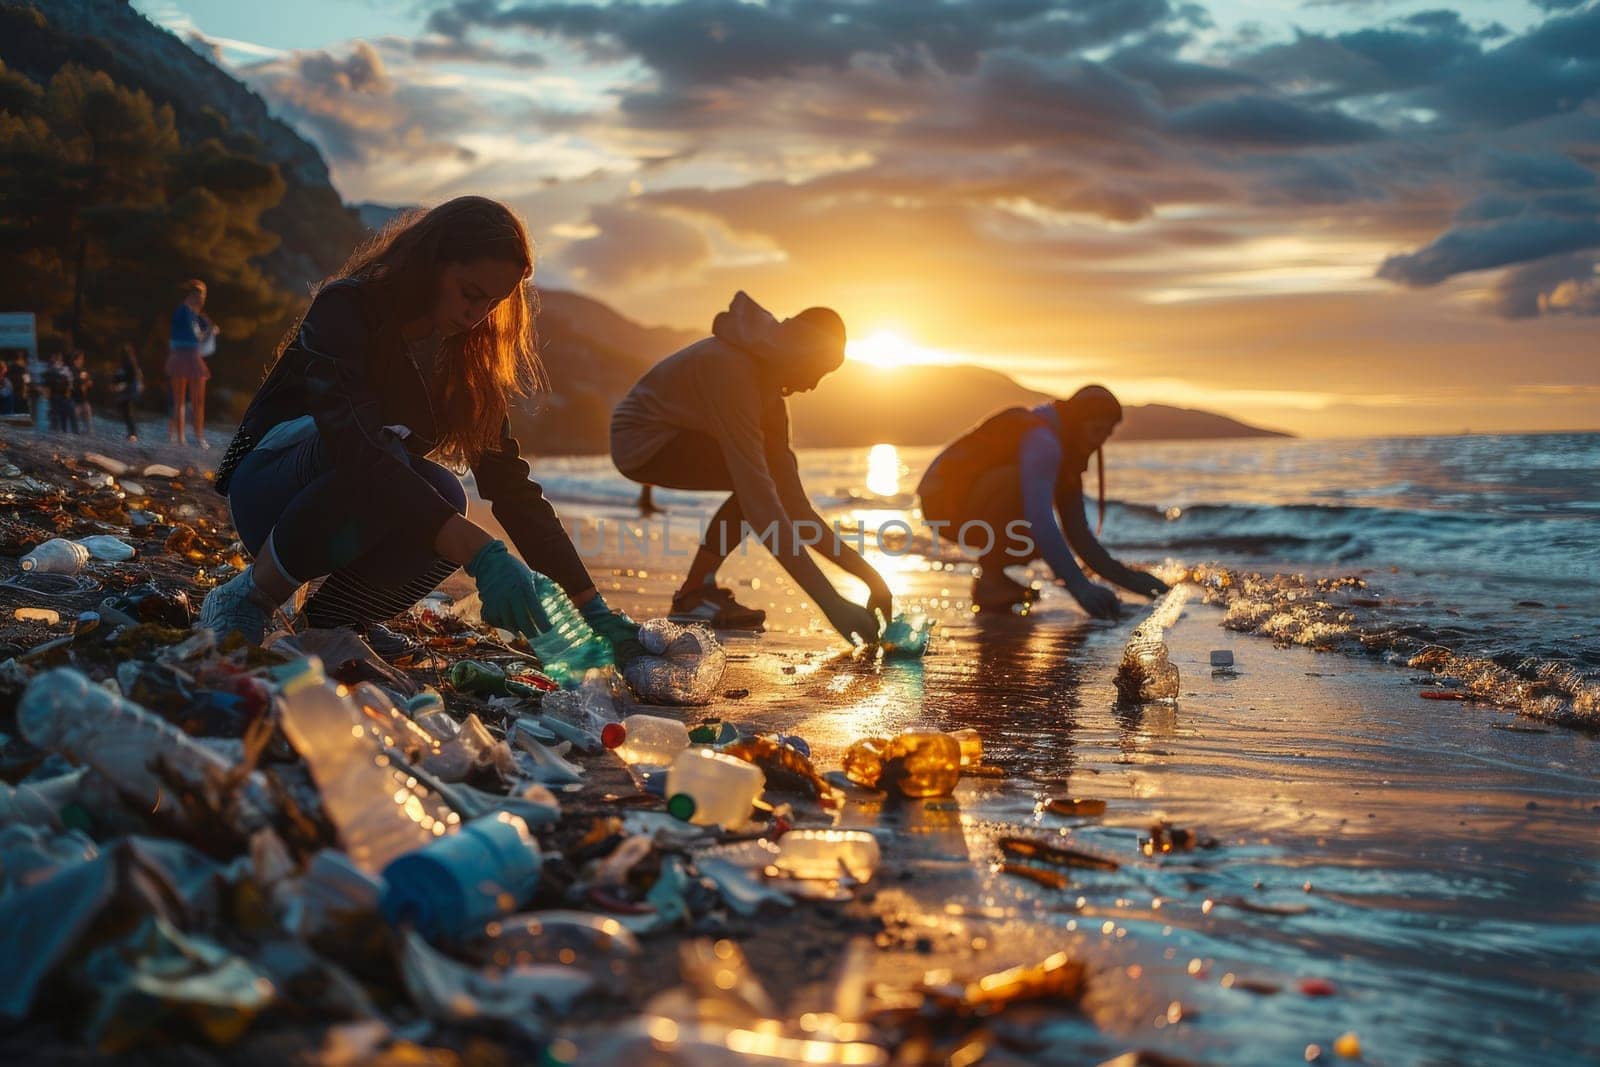 Three people are picking up trash on a beach. The sun is setting in the background, casting a warm glow over the scene. Scene is one of environmental awareness